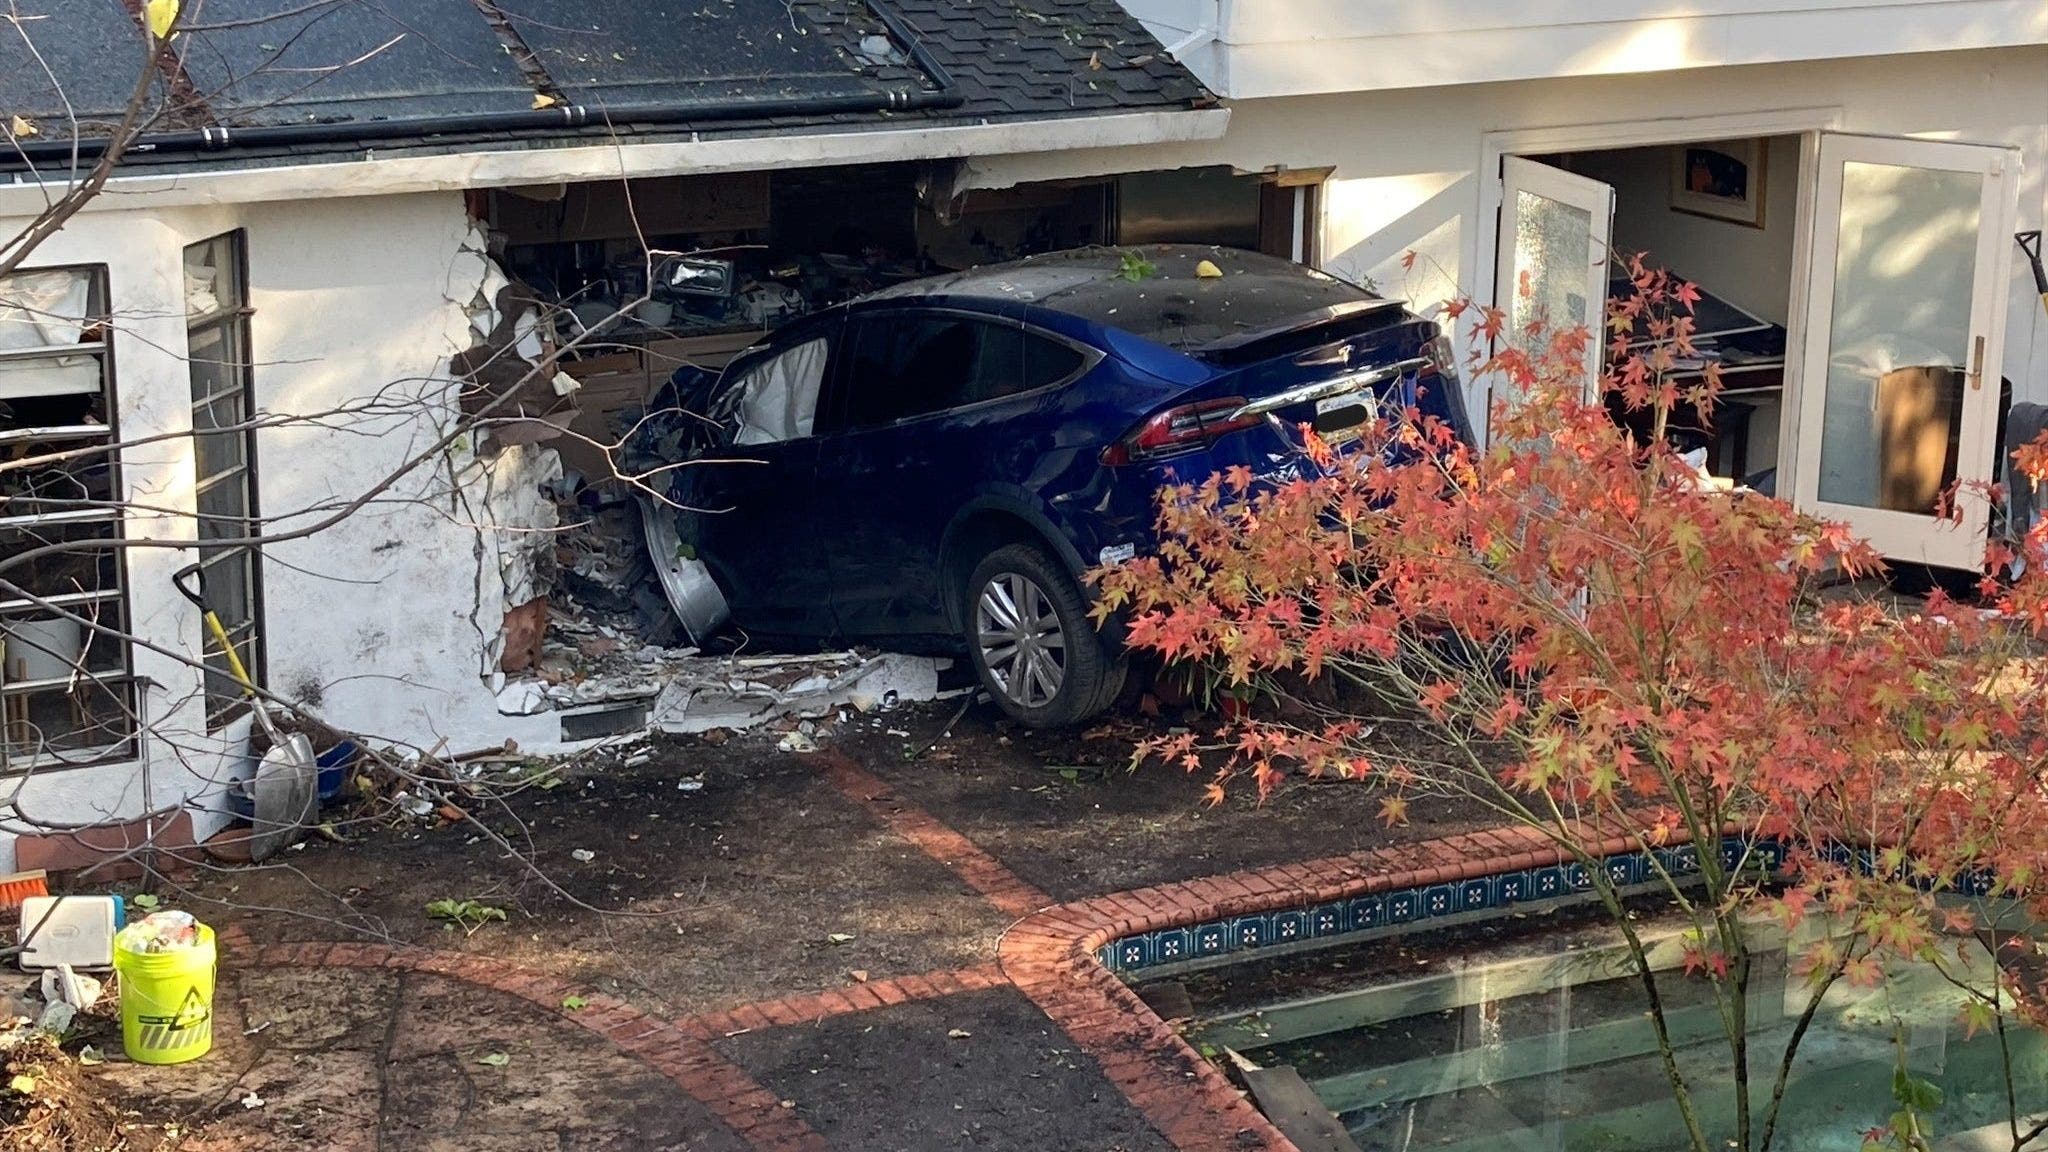 News :California Tesla driver flies over pool, crashes through house and stops in kitchen, police say